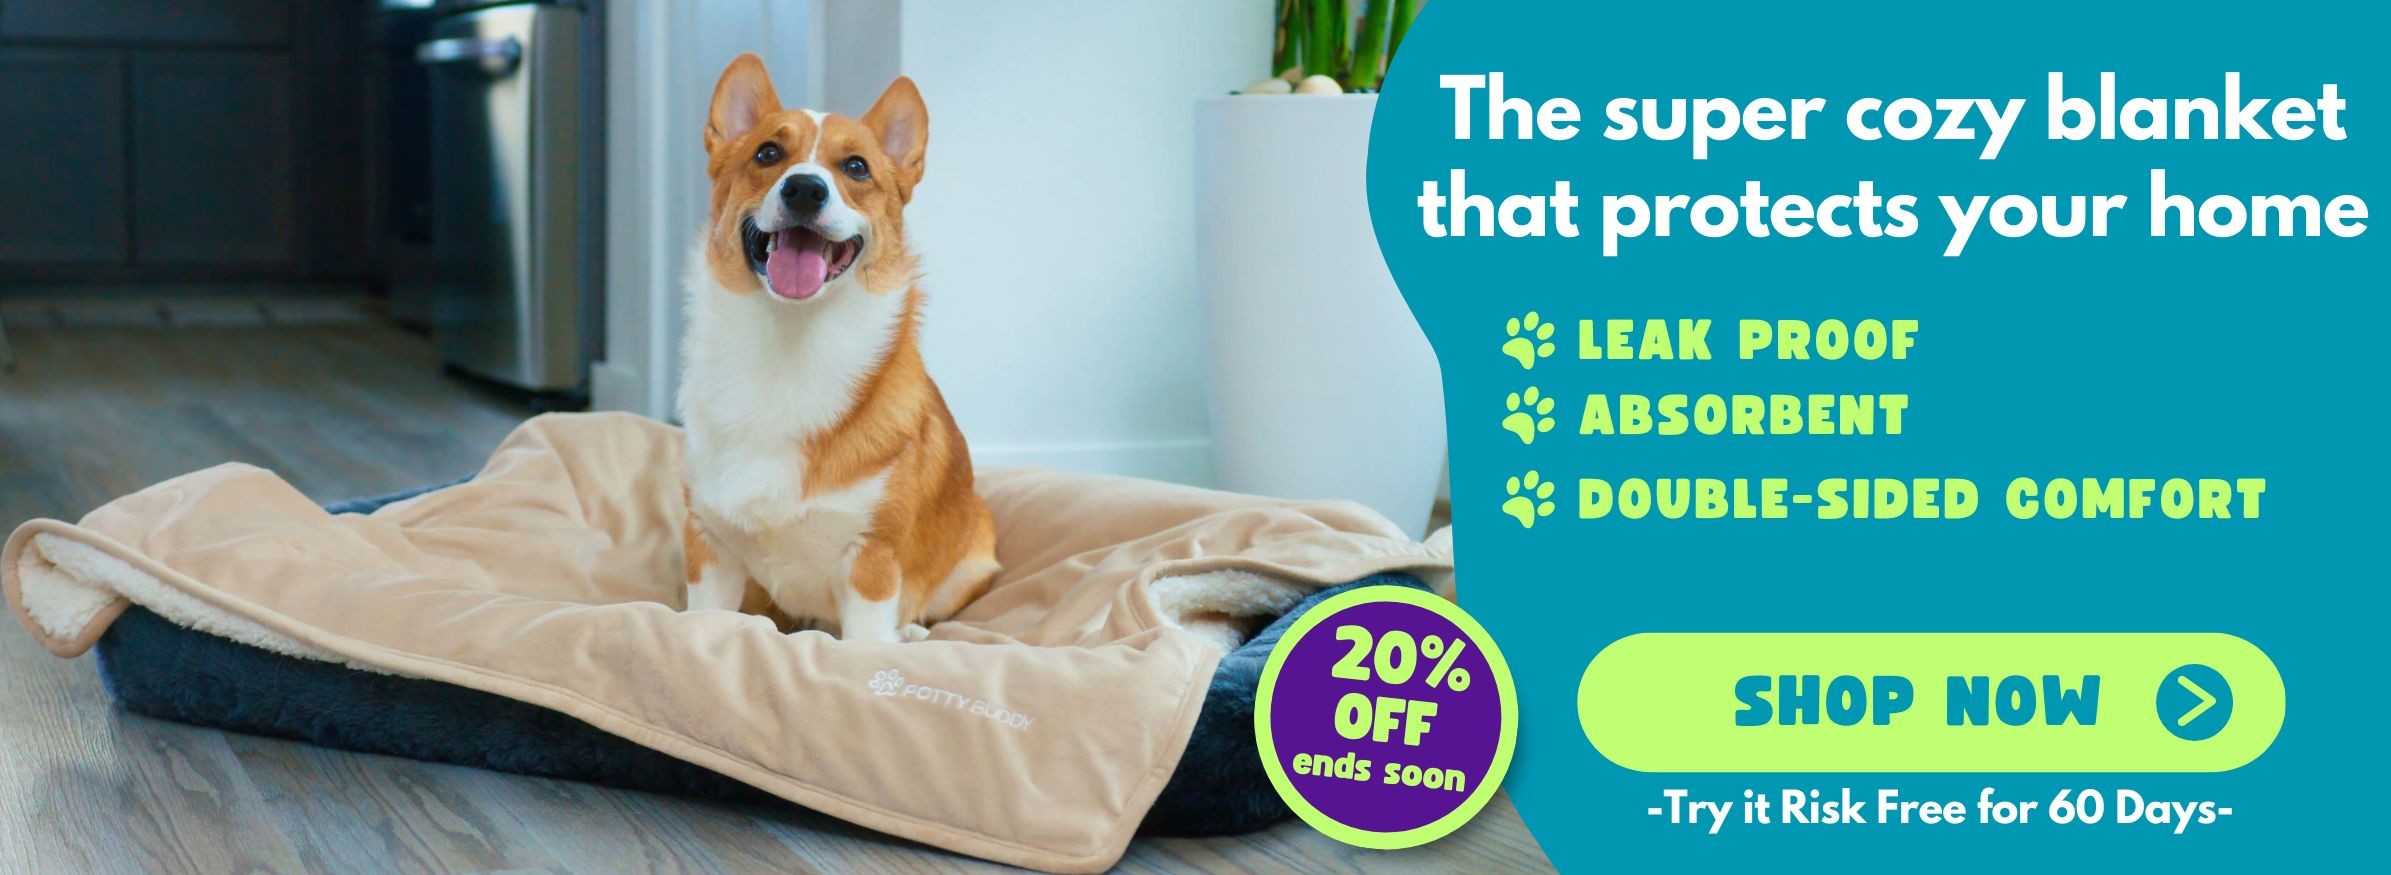 A banner showing a corgi sitting on a waterproof blanket